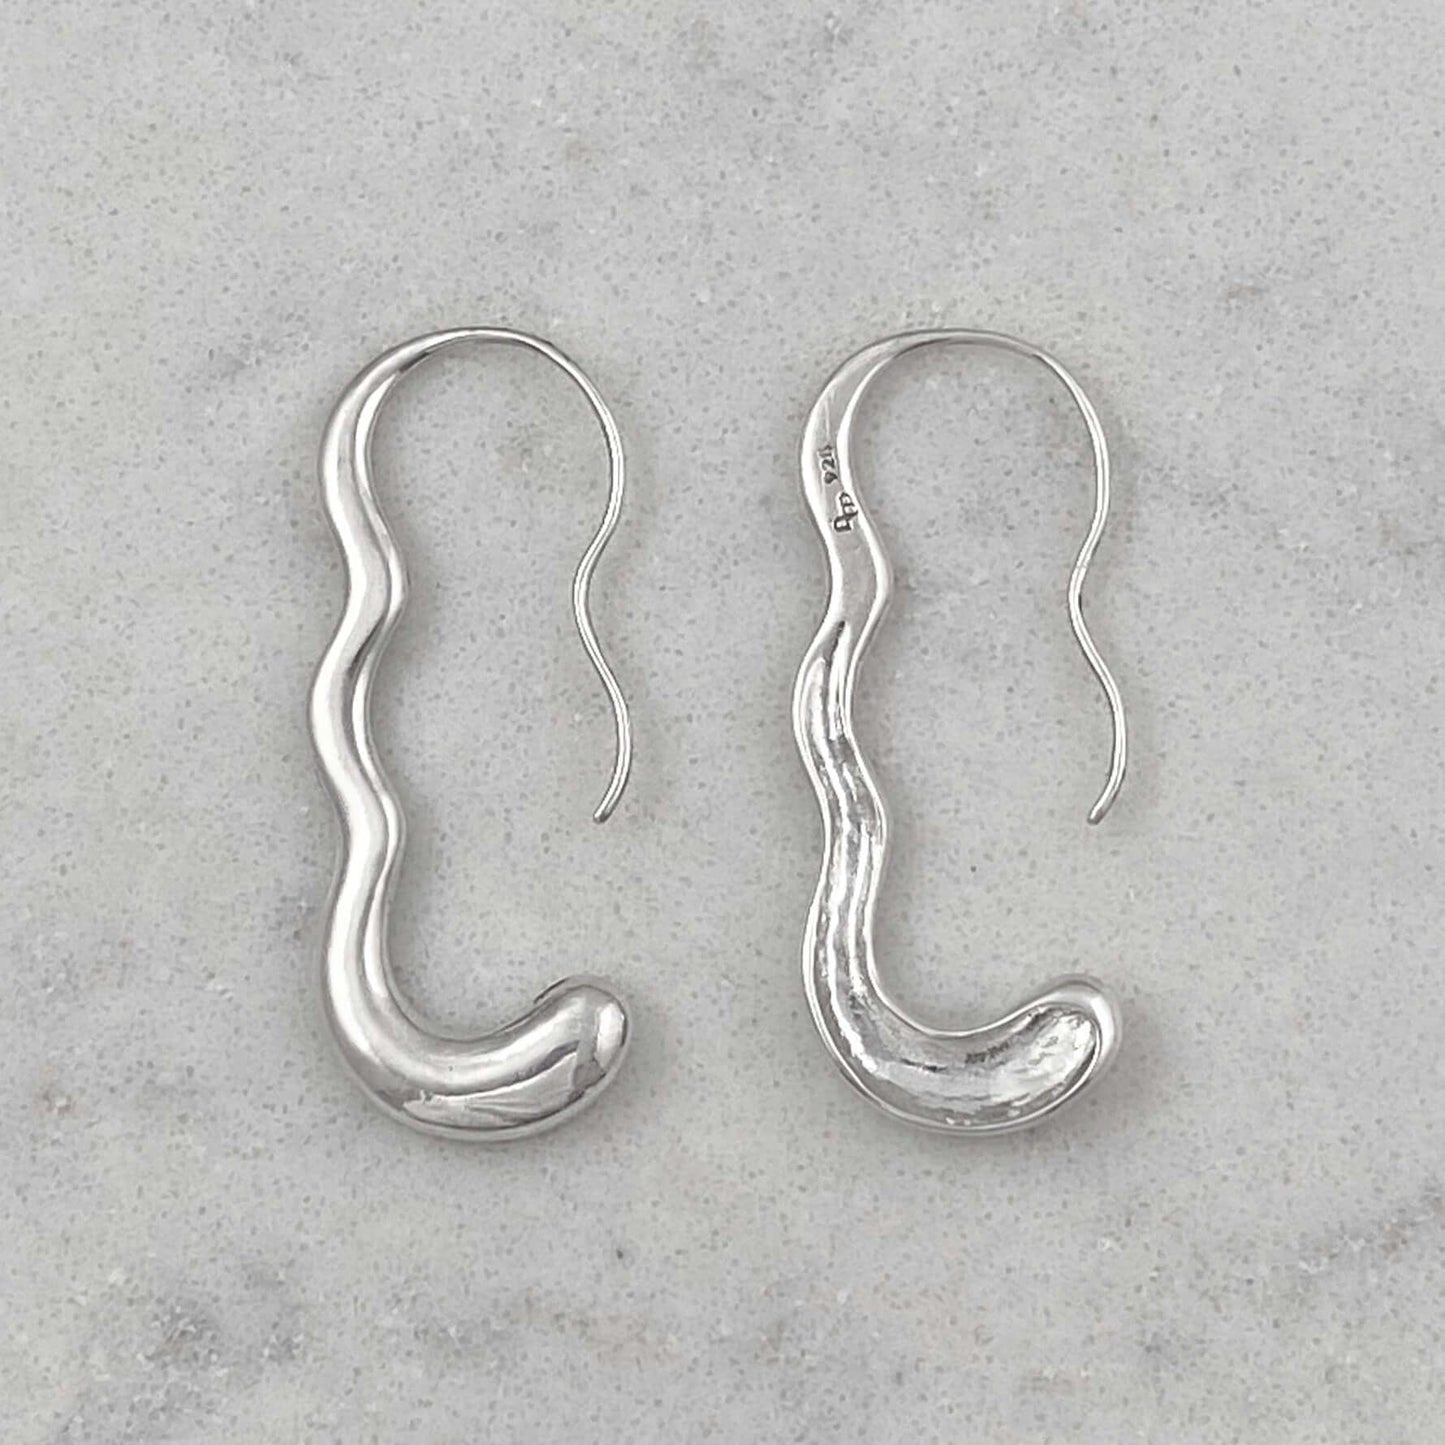 Product photo of earrings front and back